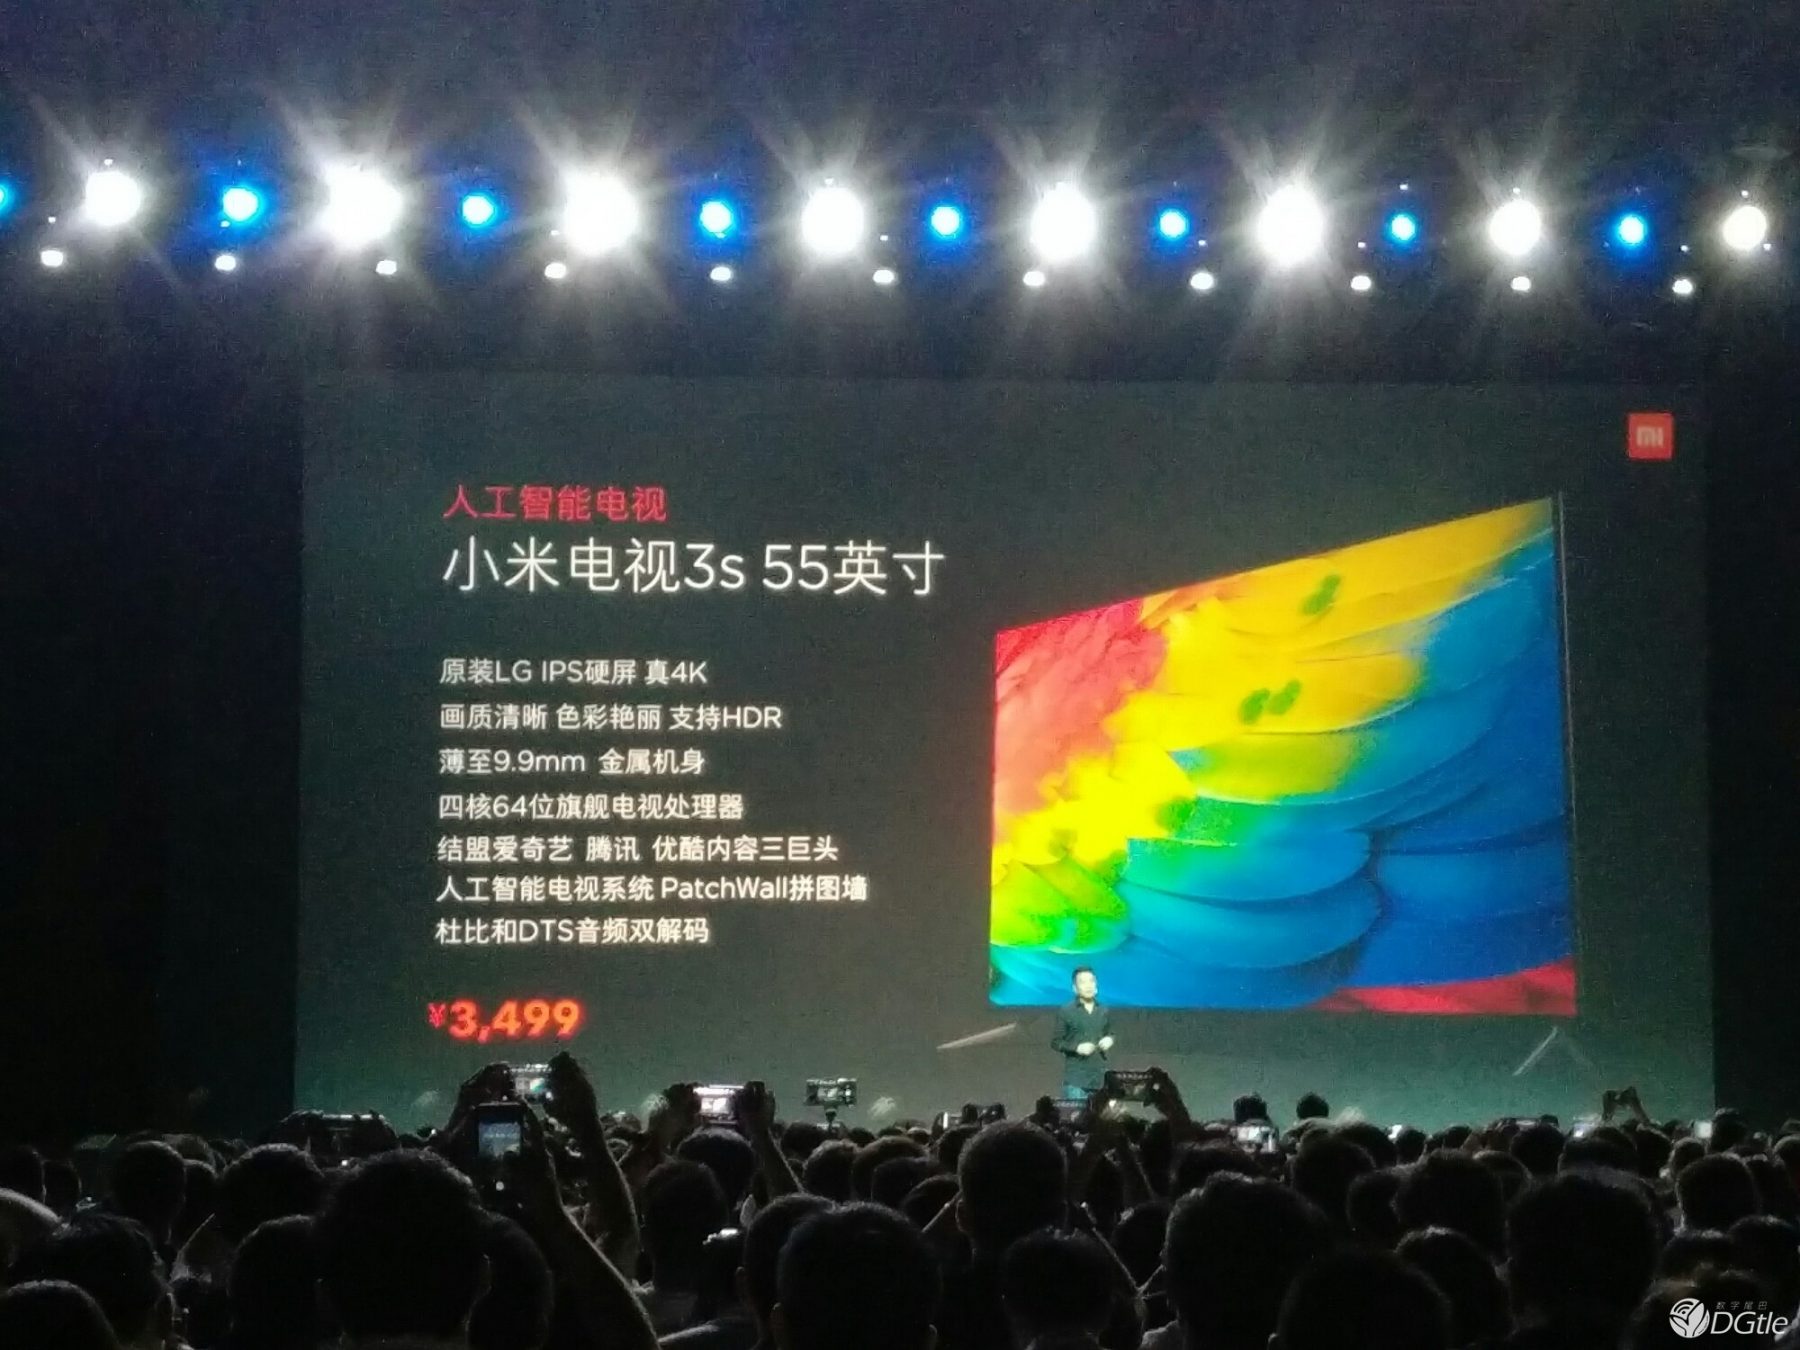 xiaomi-mi-tv-3s-launched-for-750-heres-everything-you-need-to-know-1